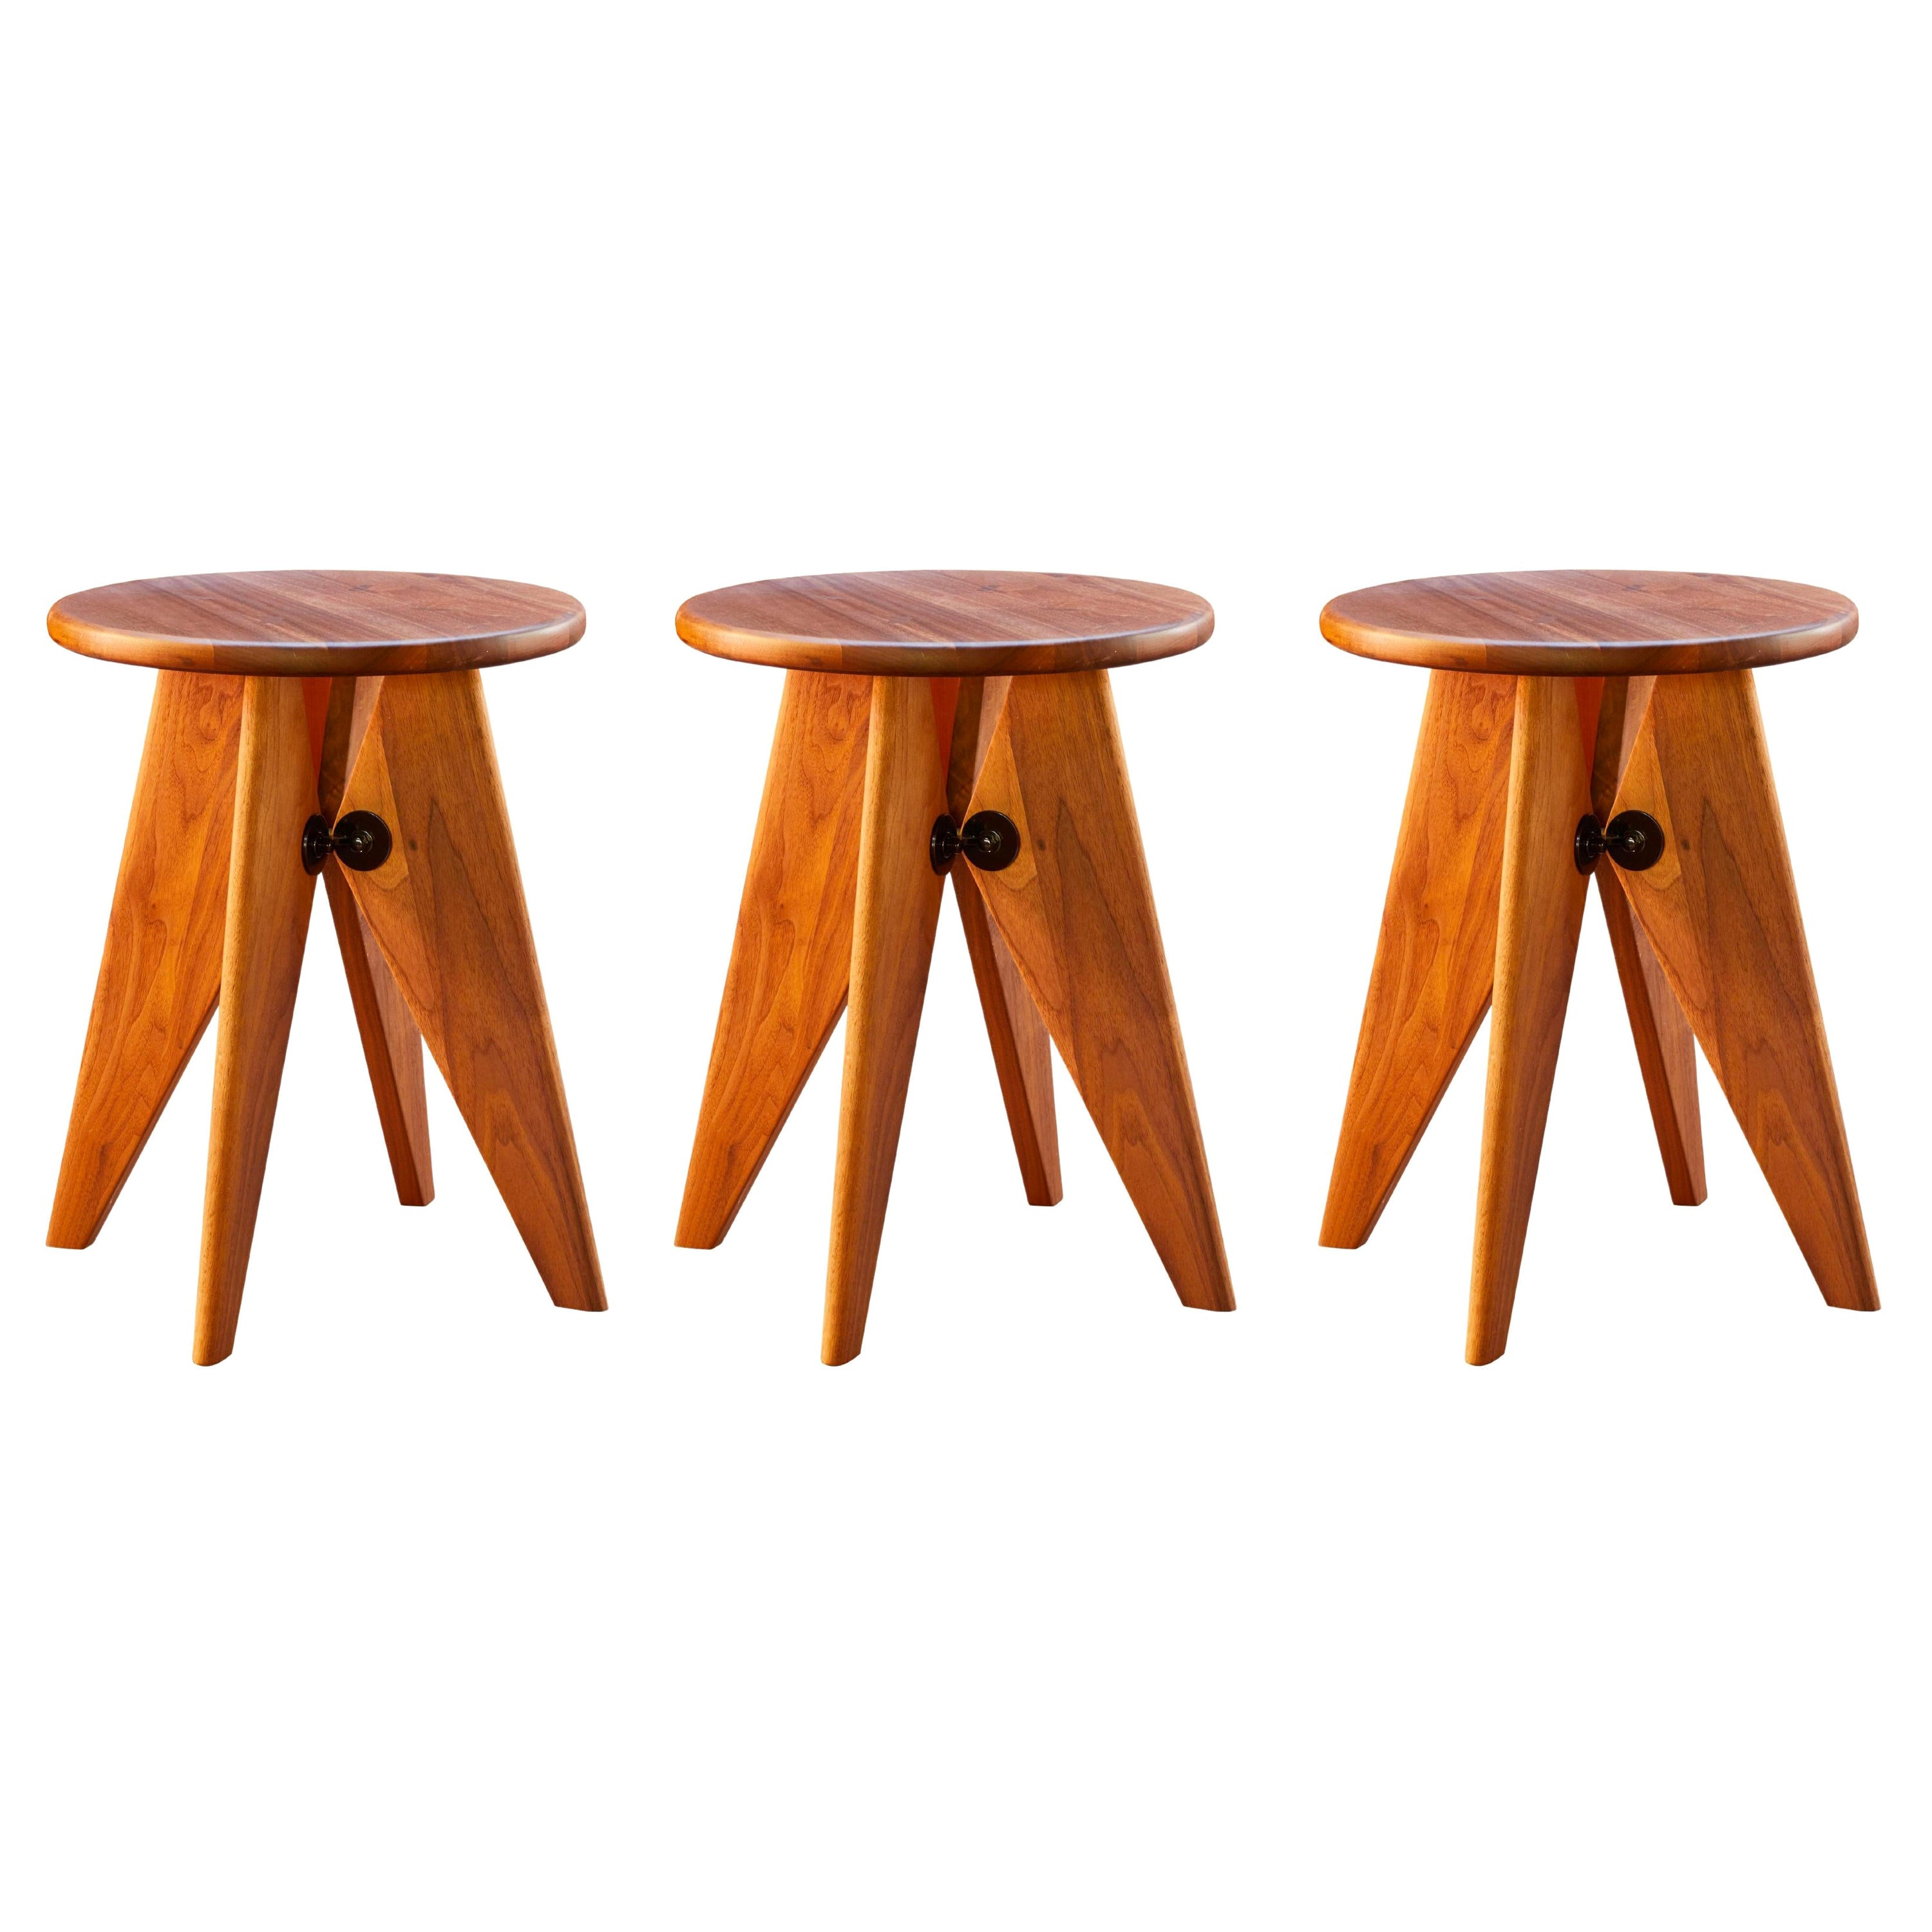 Set of 3 Jean Prouvé Tabouret Solvay Stools in American Walnut